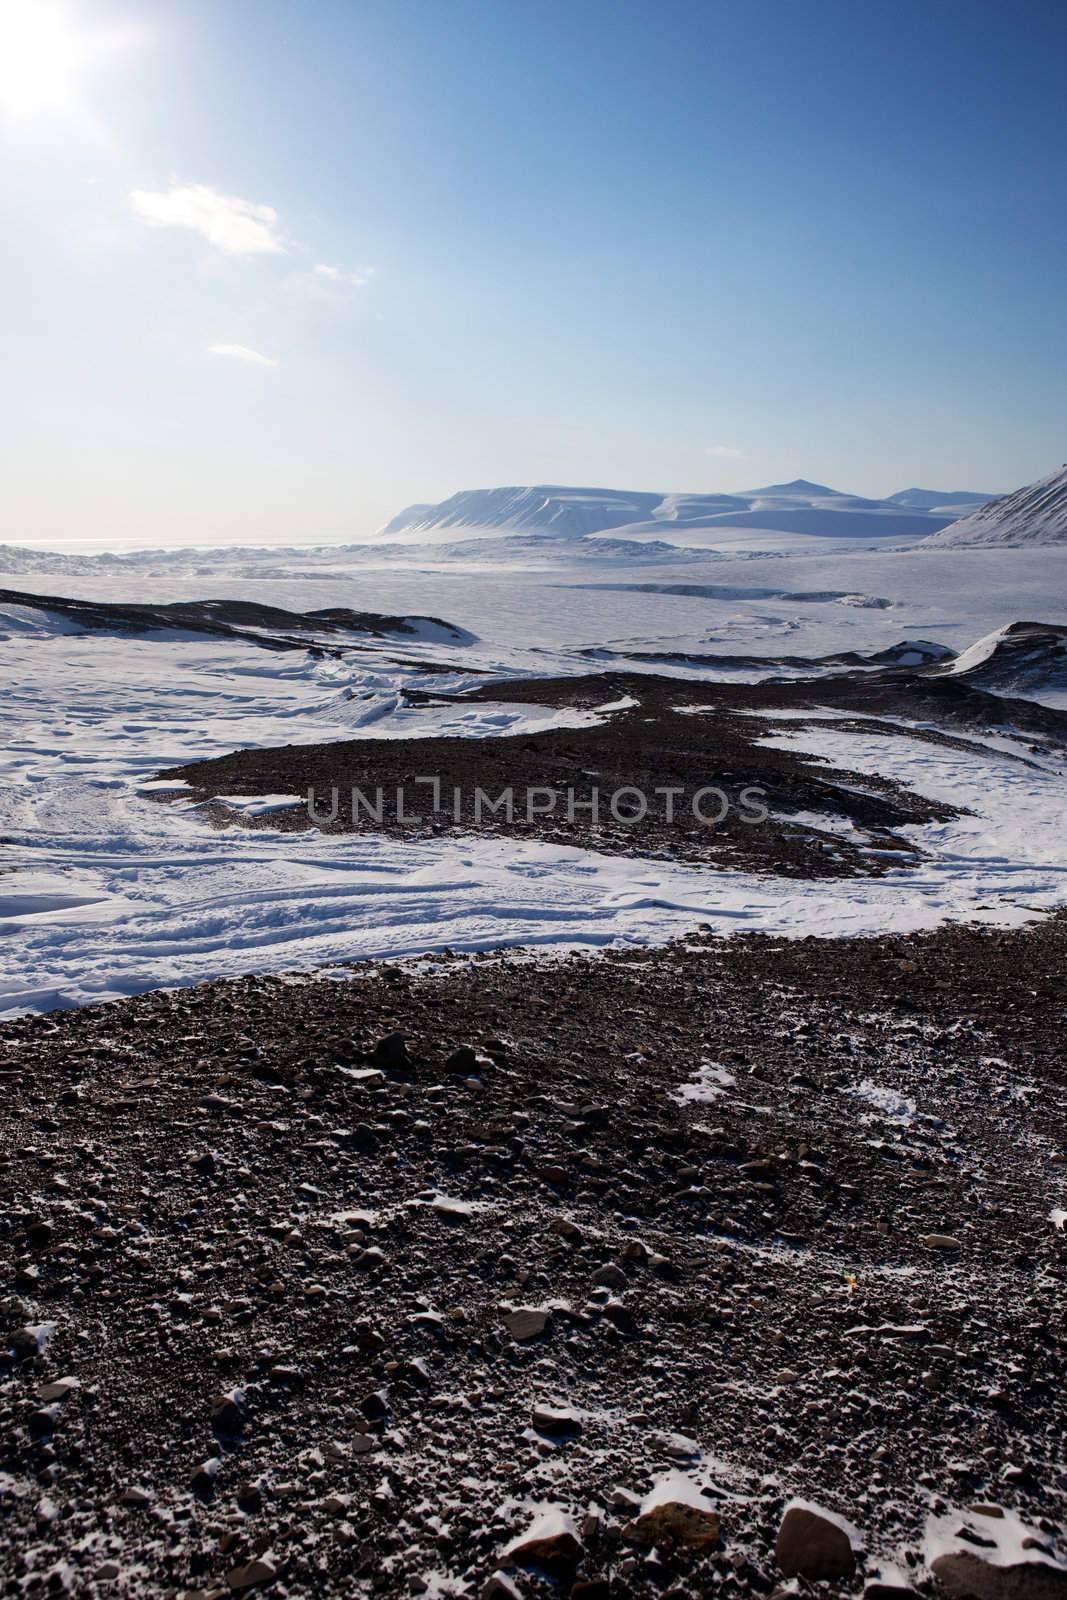 A cold and barren winter landscape in Svalbard, Norway